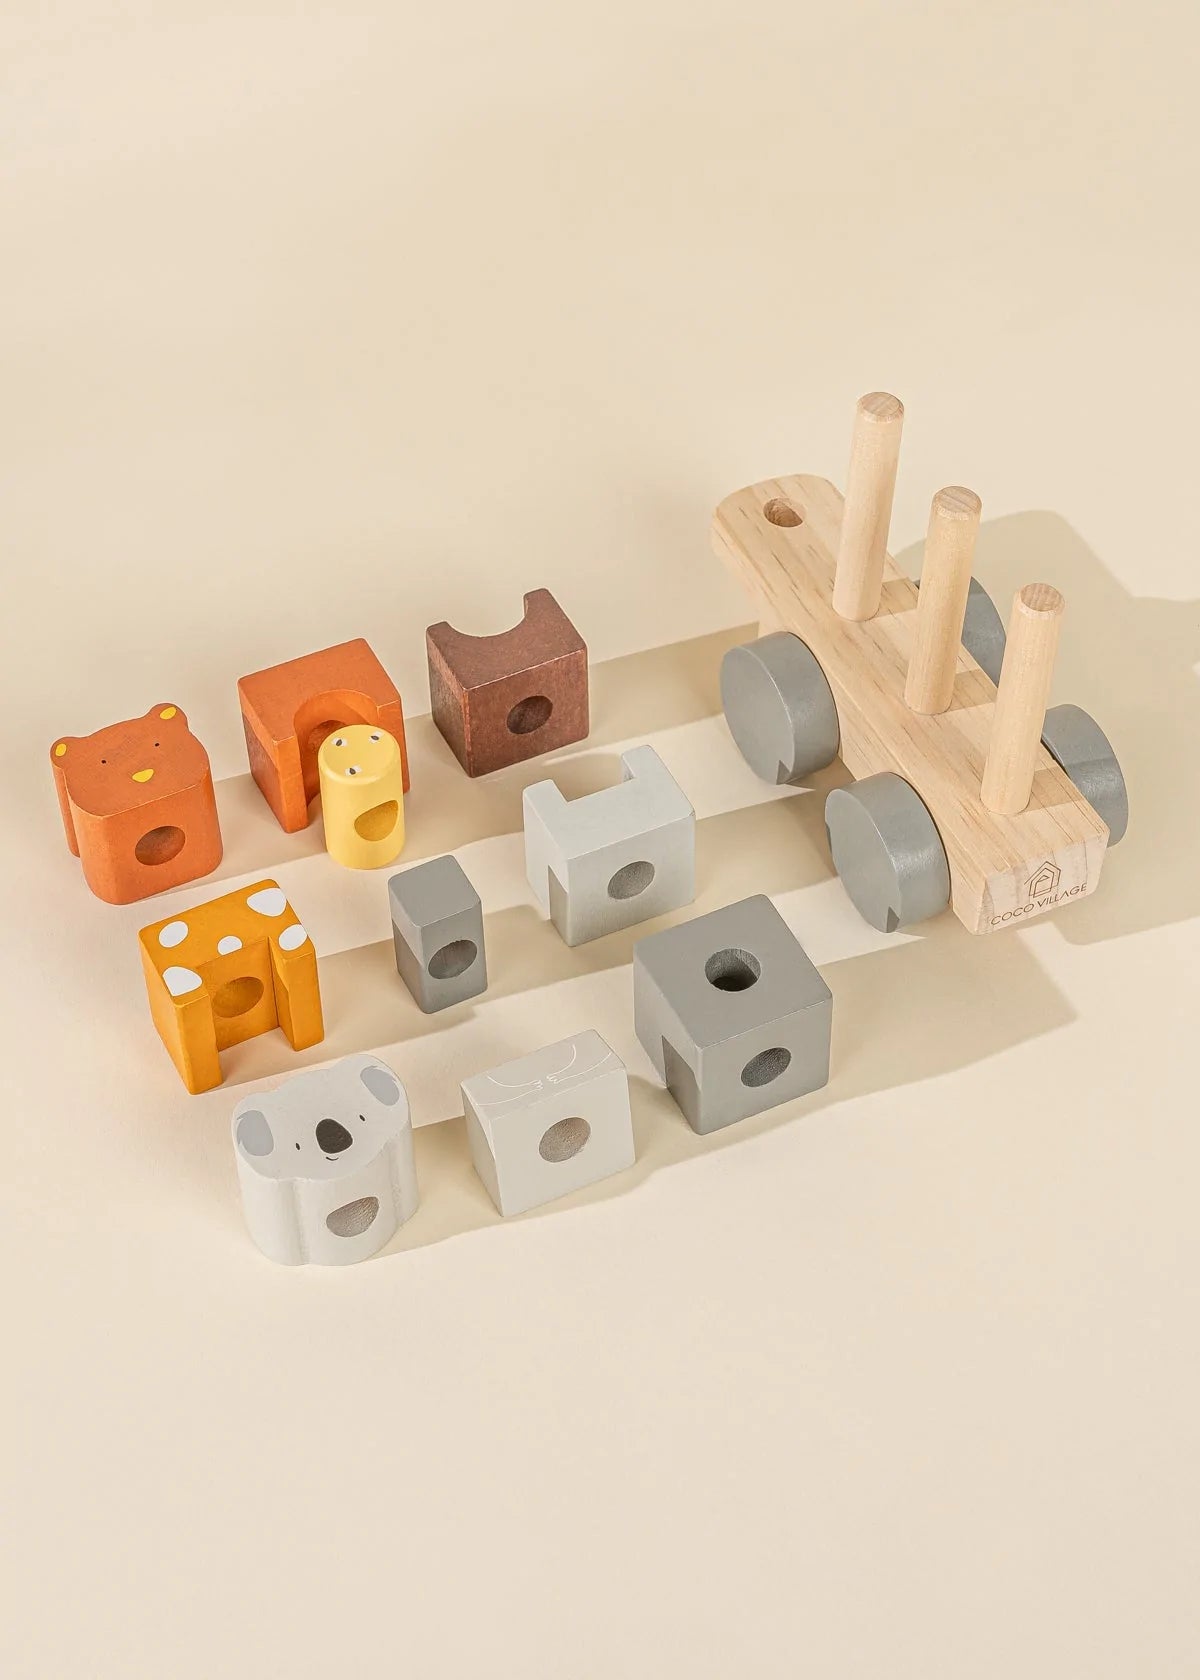 Dissembled pieces of Cocovillage wooden toy stacking train- circus series